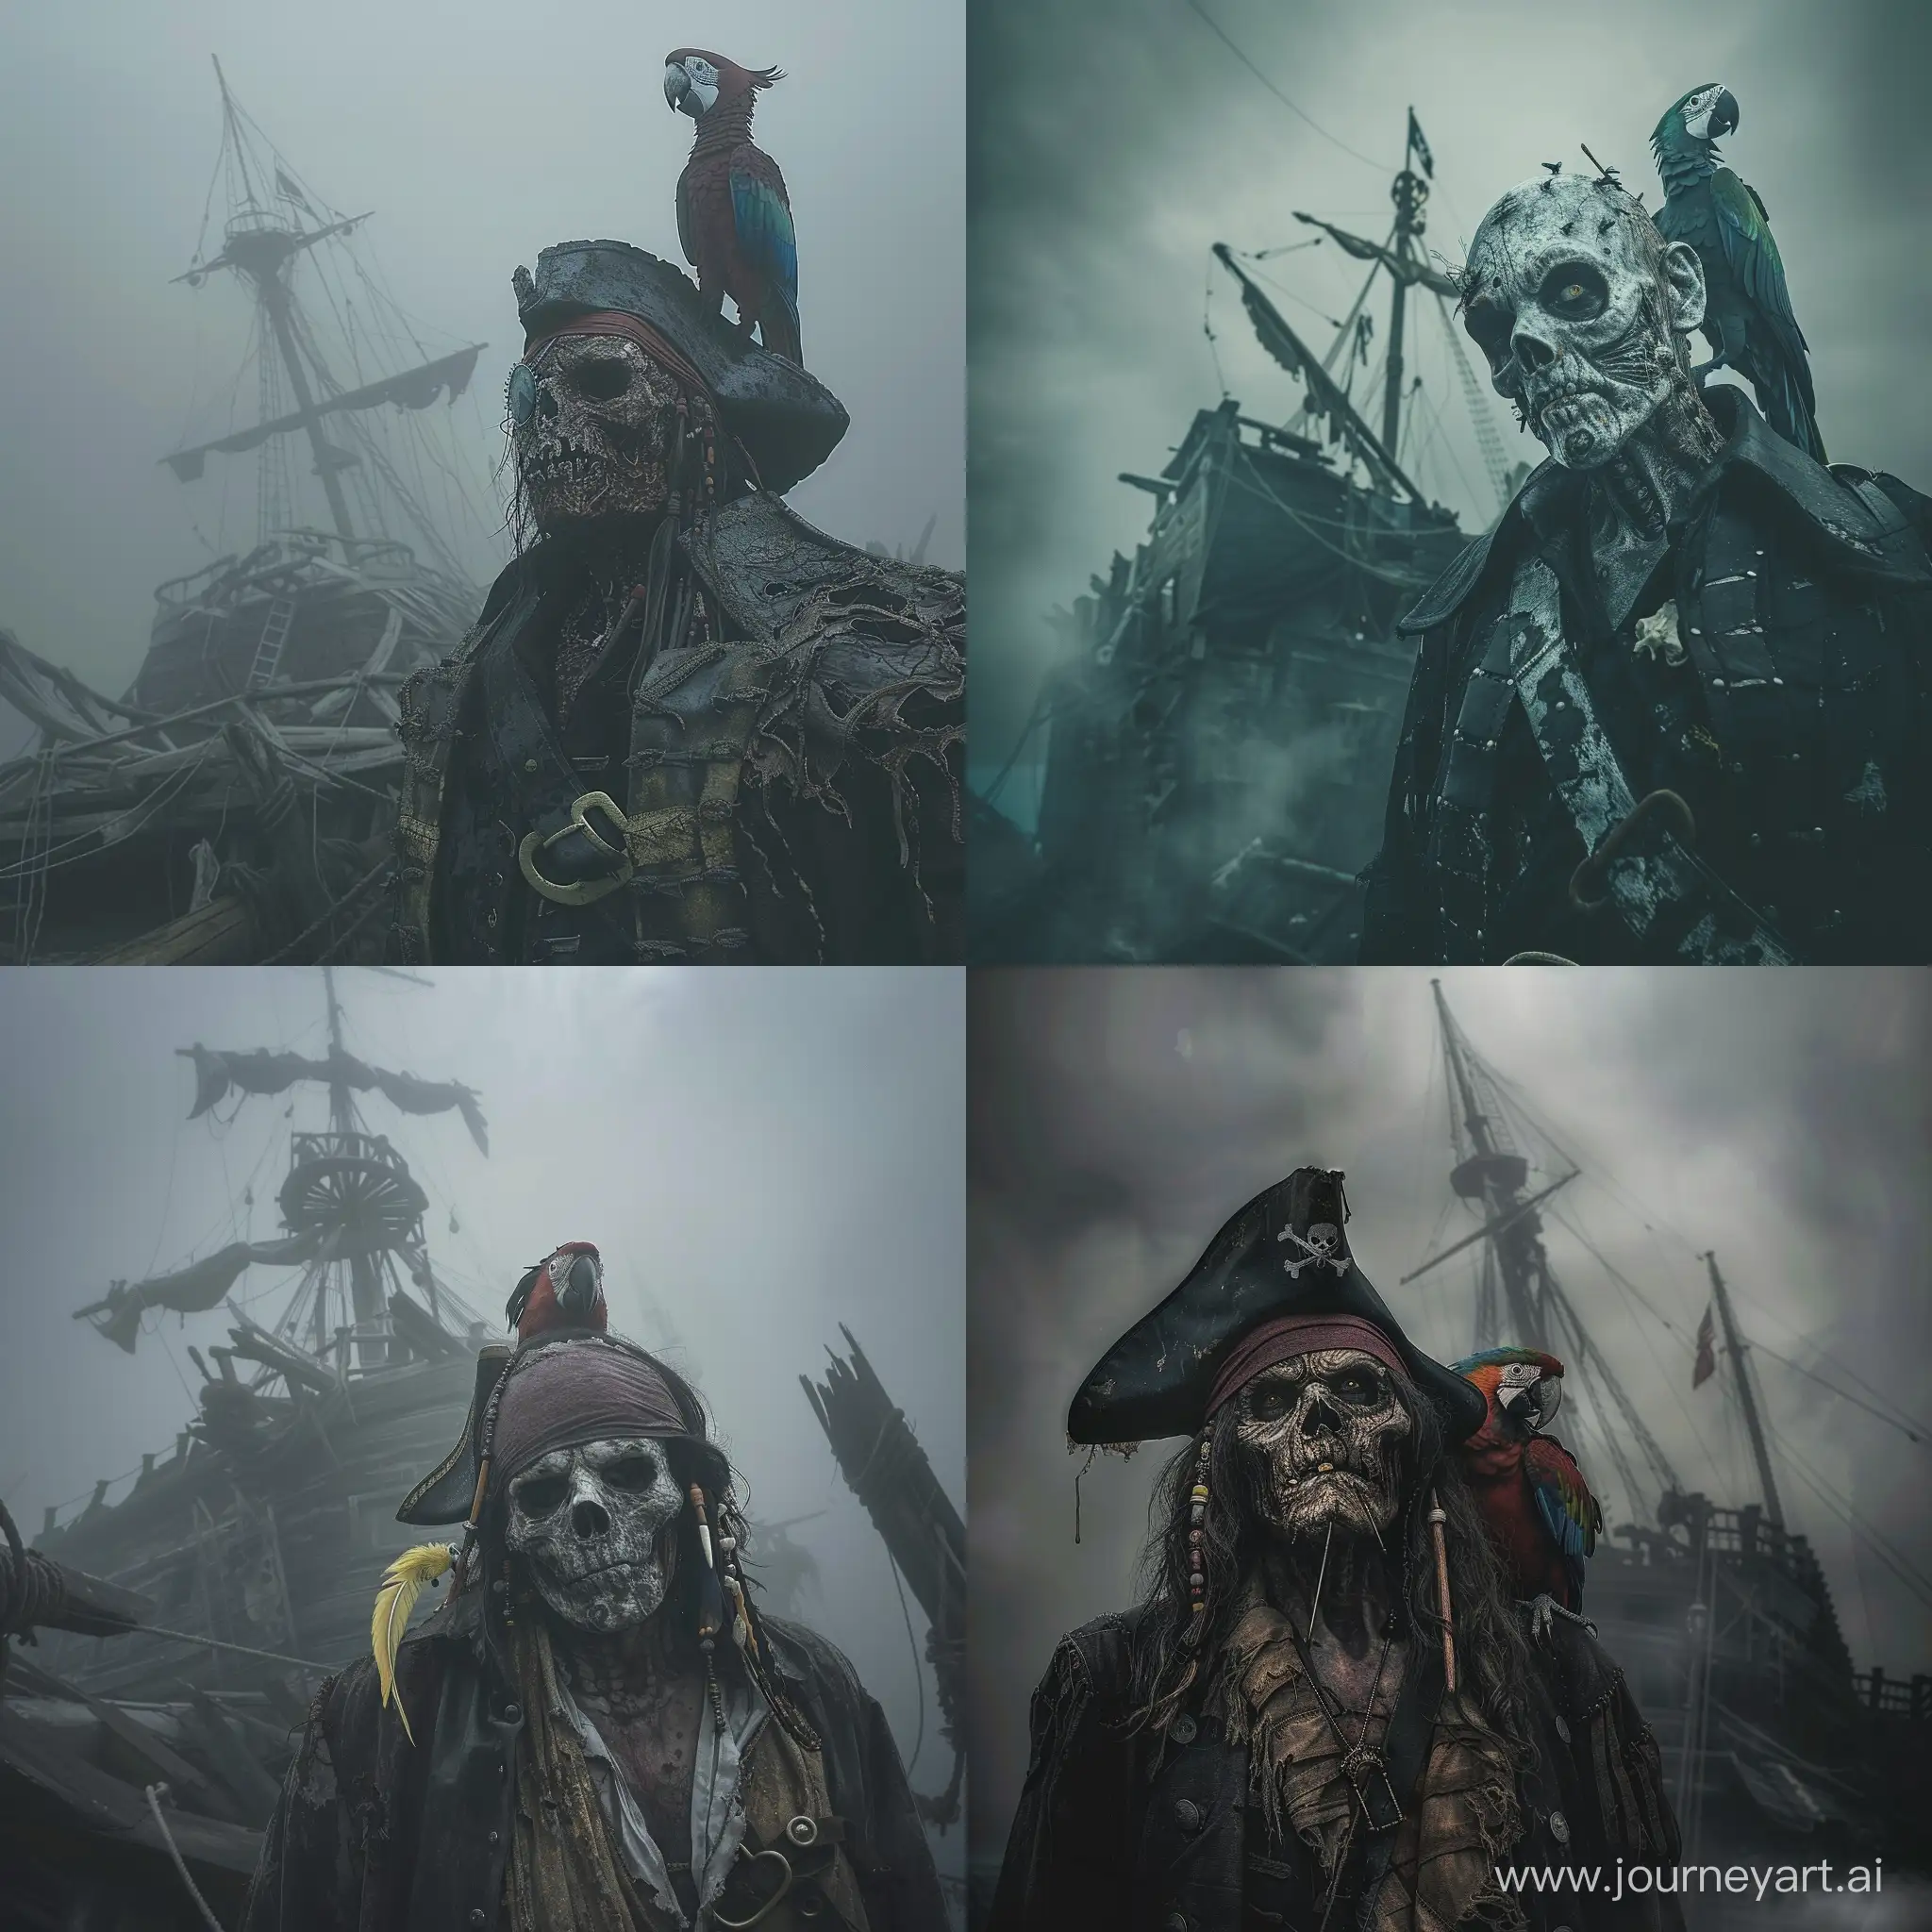 Sinister-Cursed-Pirate-Stands-Amidst-Spooky-Shipwreck-in-Eerie-Fog